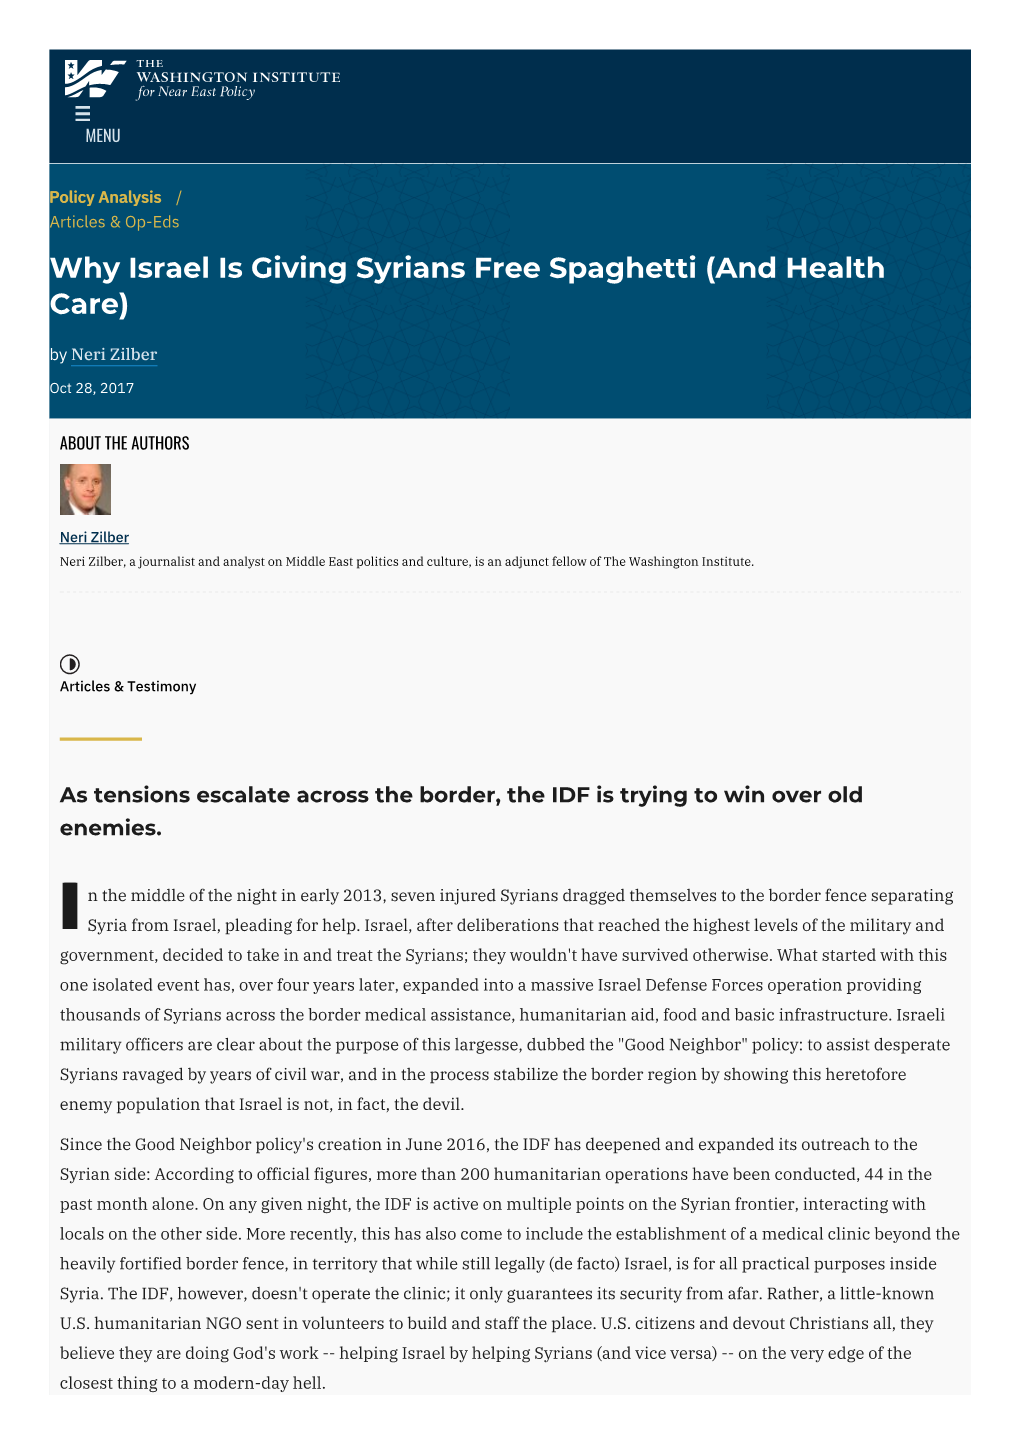 Why Israel Is Giving Syrians Free Spaghetti (And Health Care) | the Washington Institute